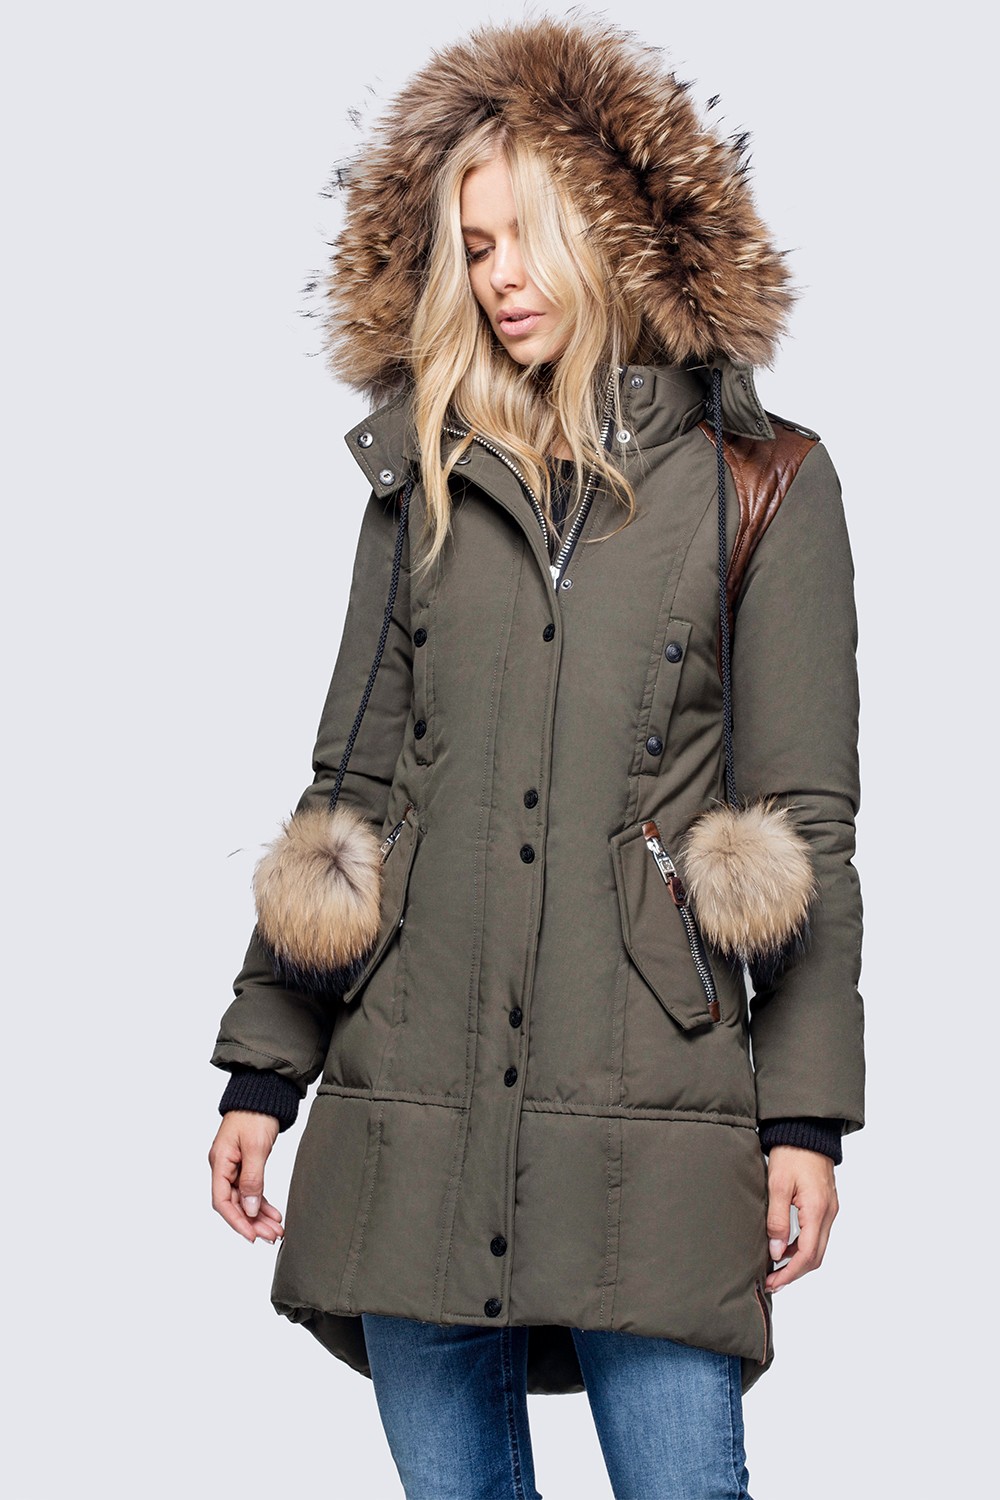 Bomb Product of the Day: Nicole Benisti’s Quilted Puffer with Pom Poms